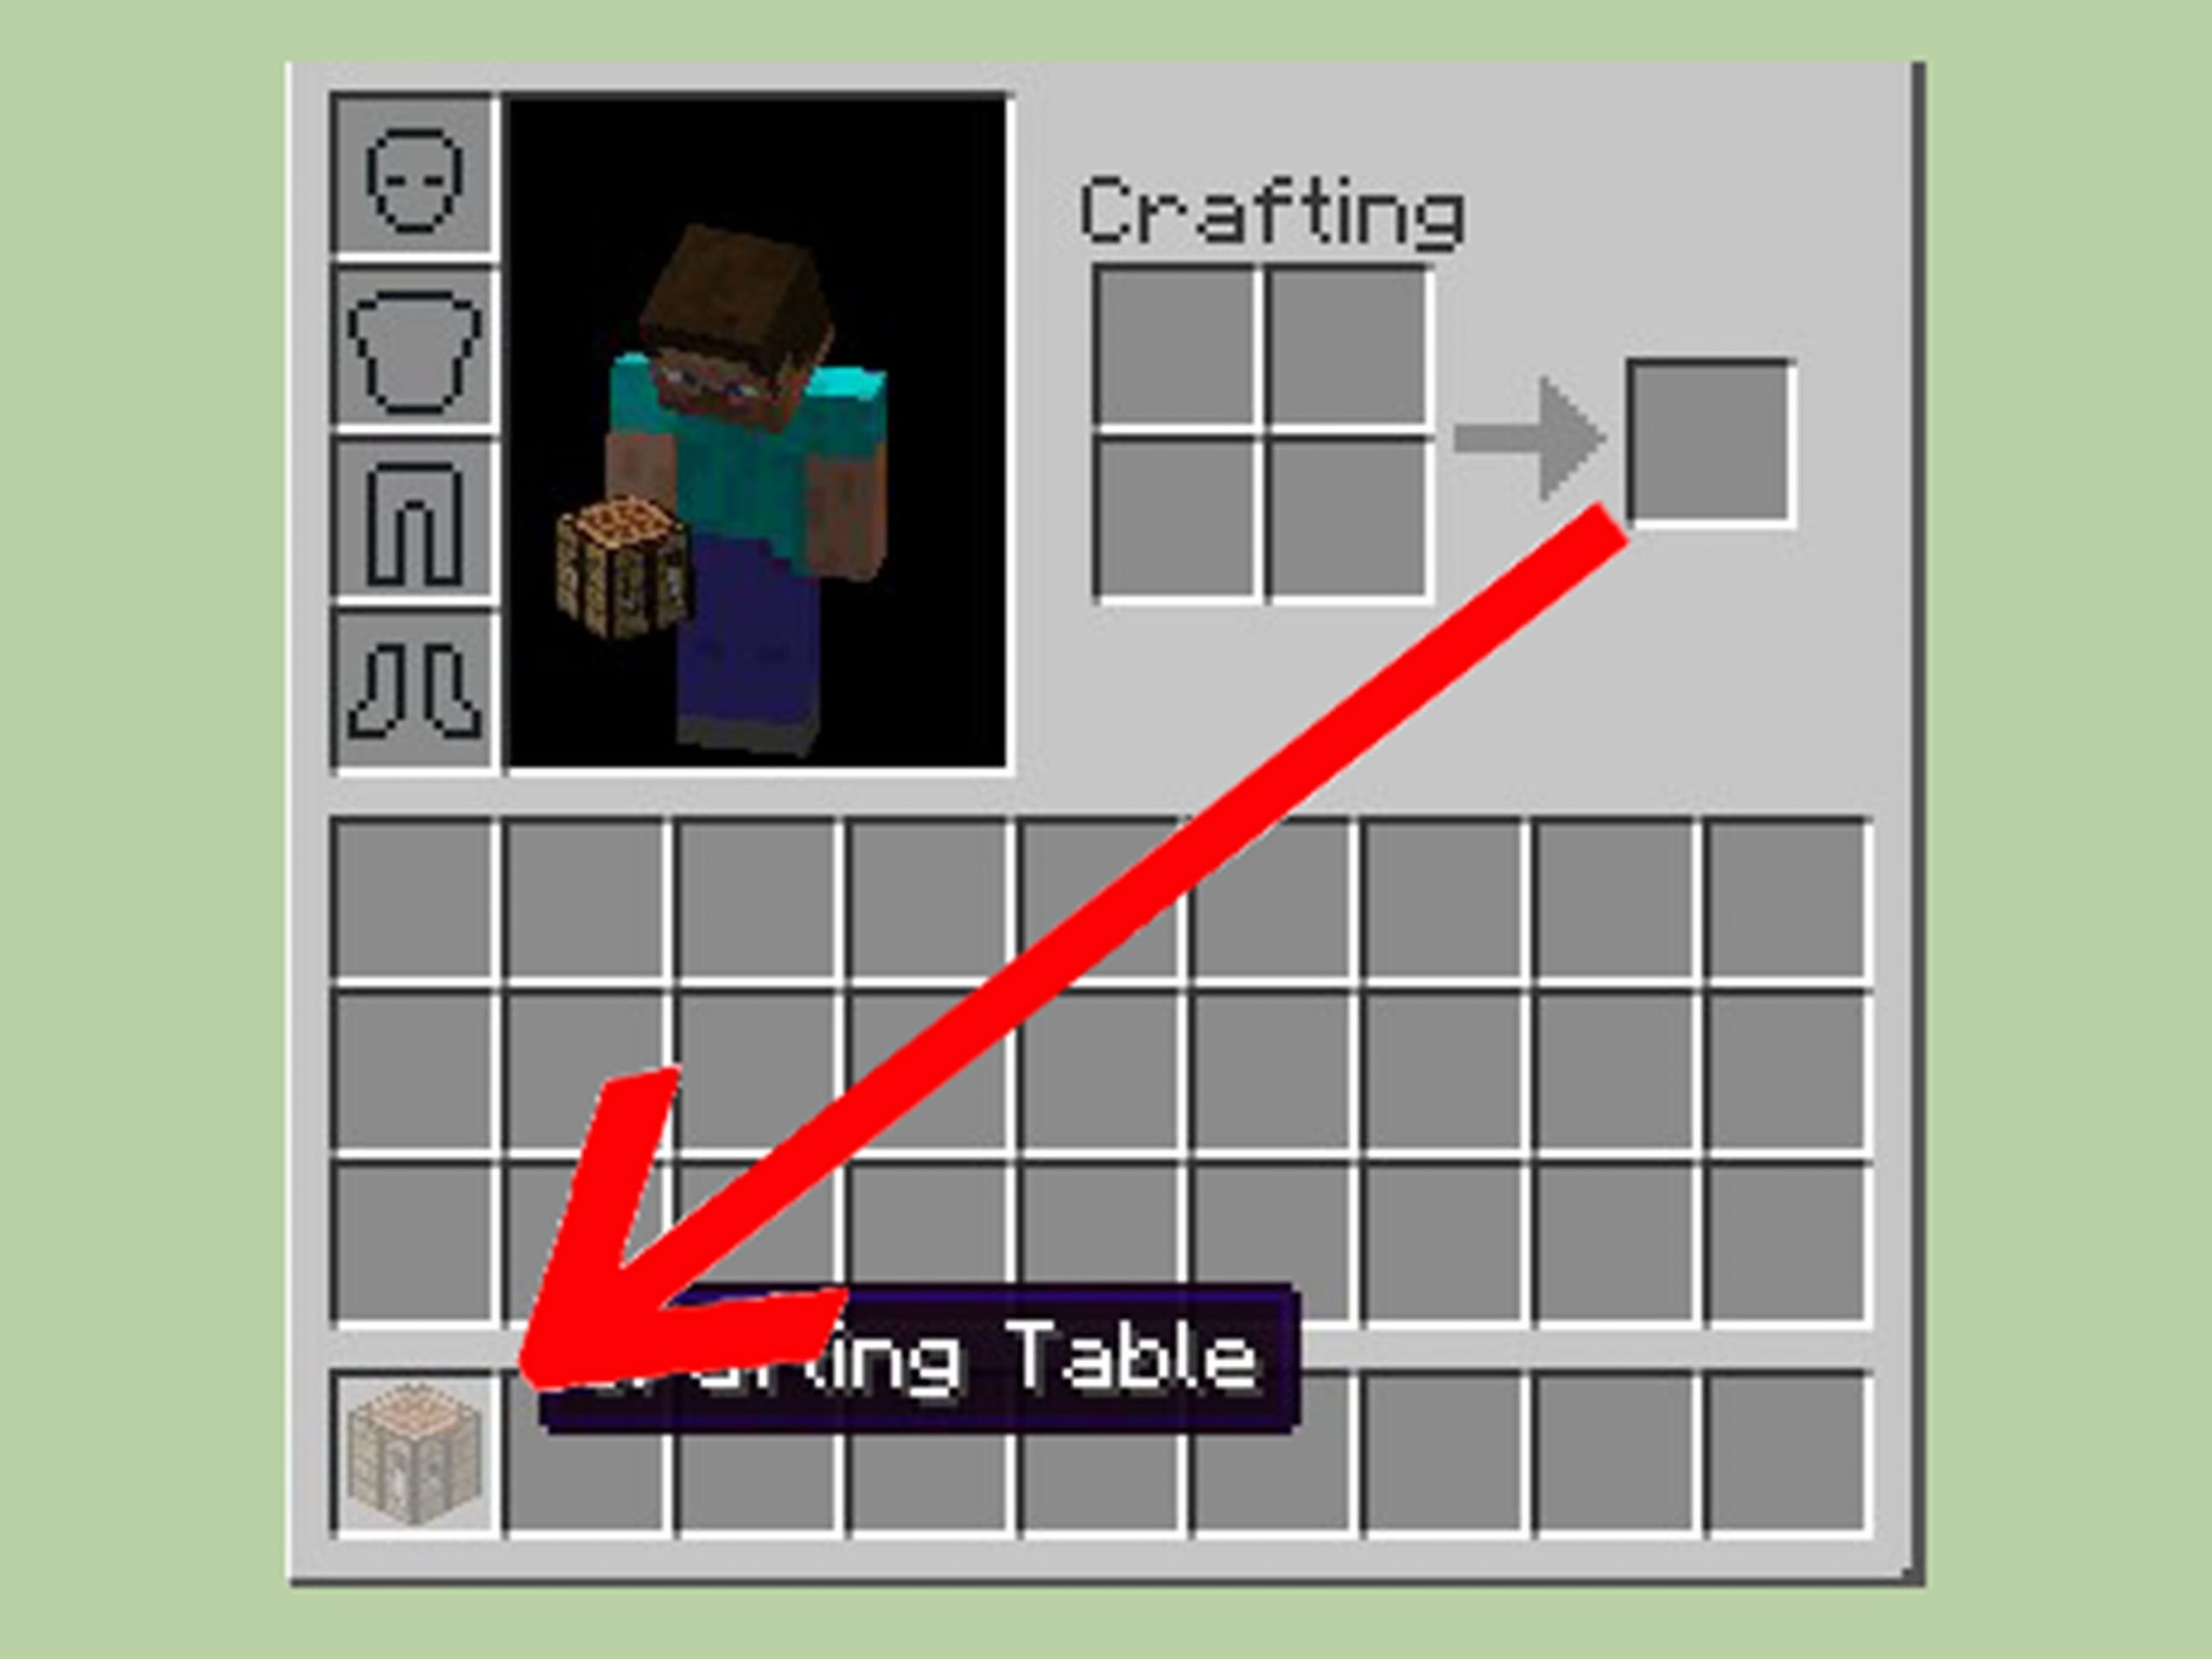 How to Make a Crafting Table in Minecraft: 7 Steps